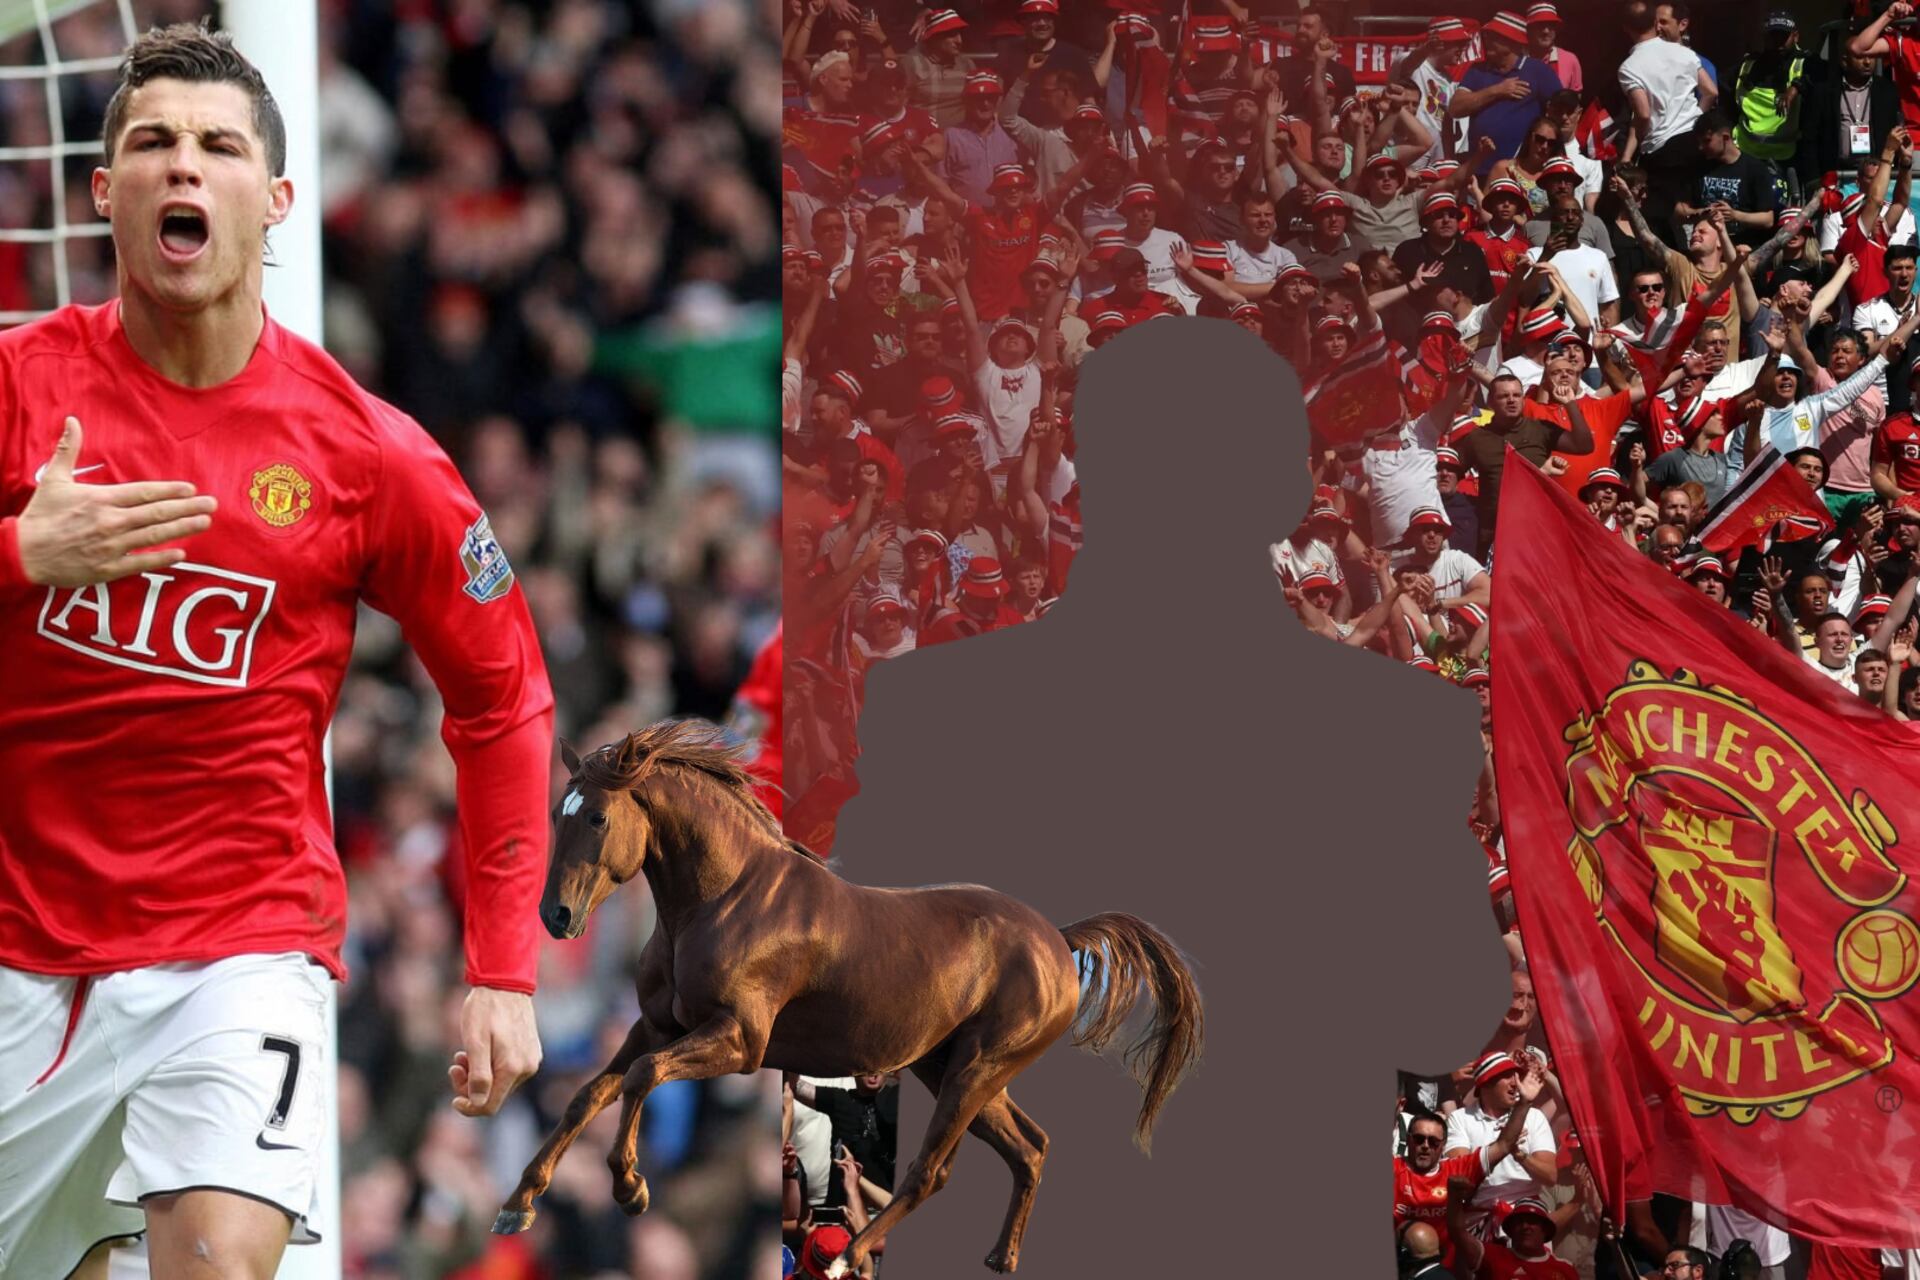 He won everything with Cristiano and Man United, now is dedicated to horse races